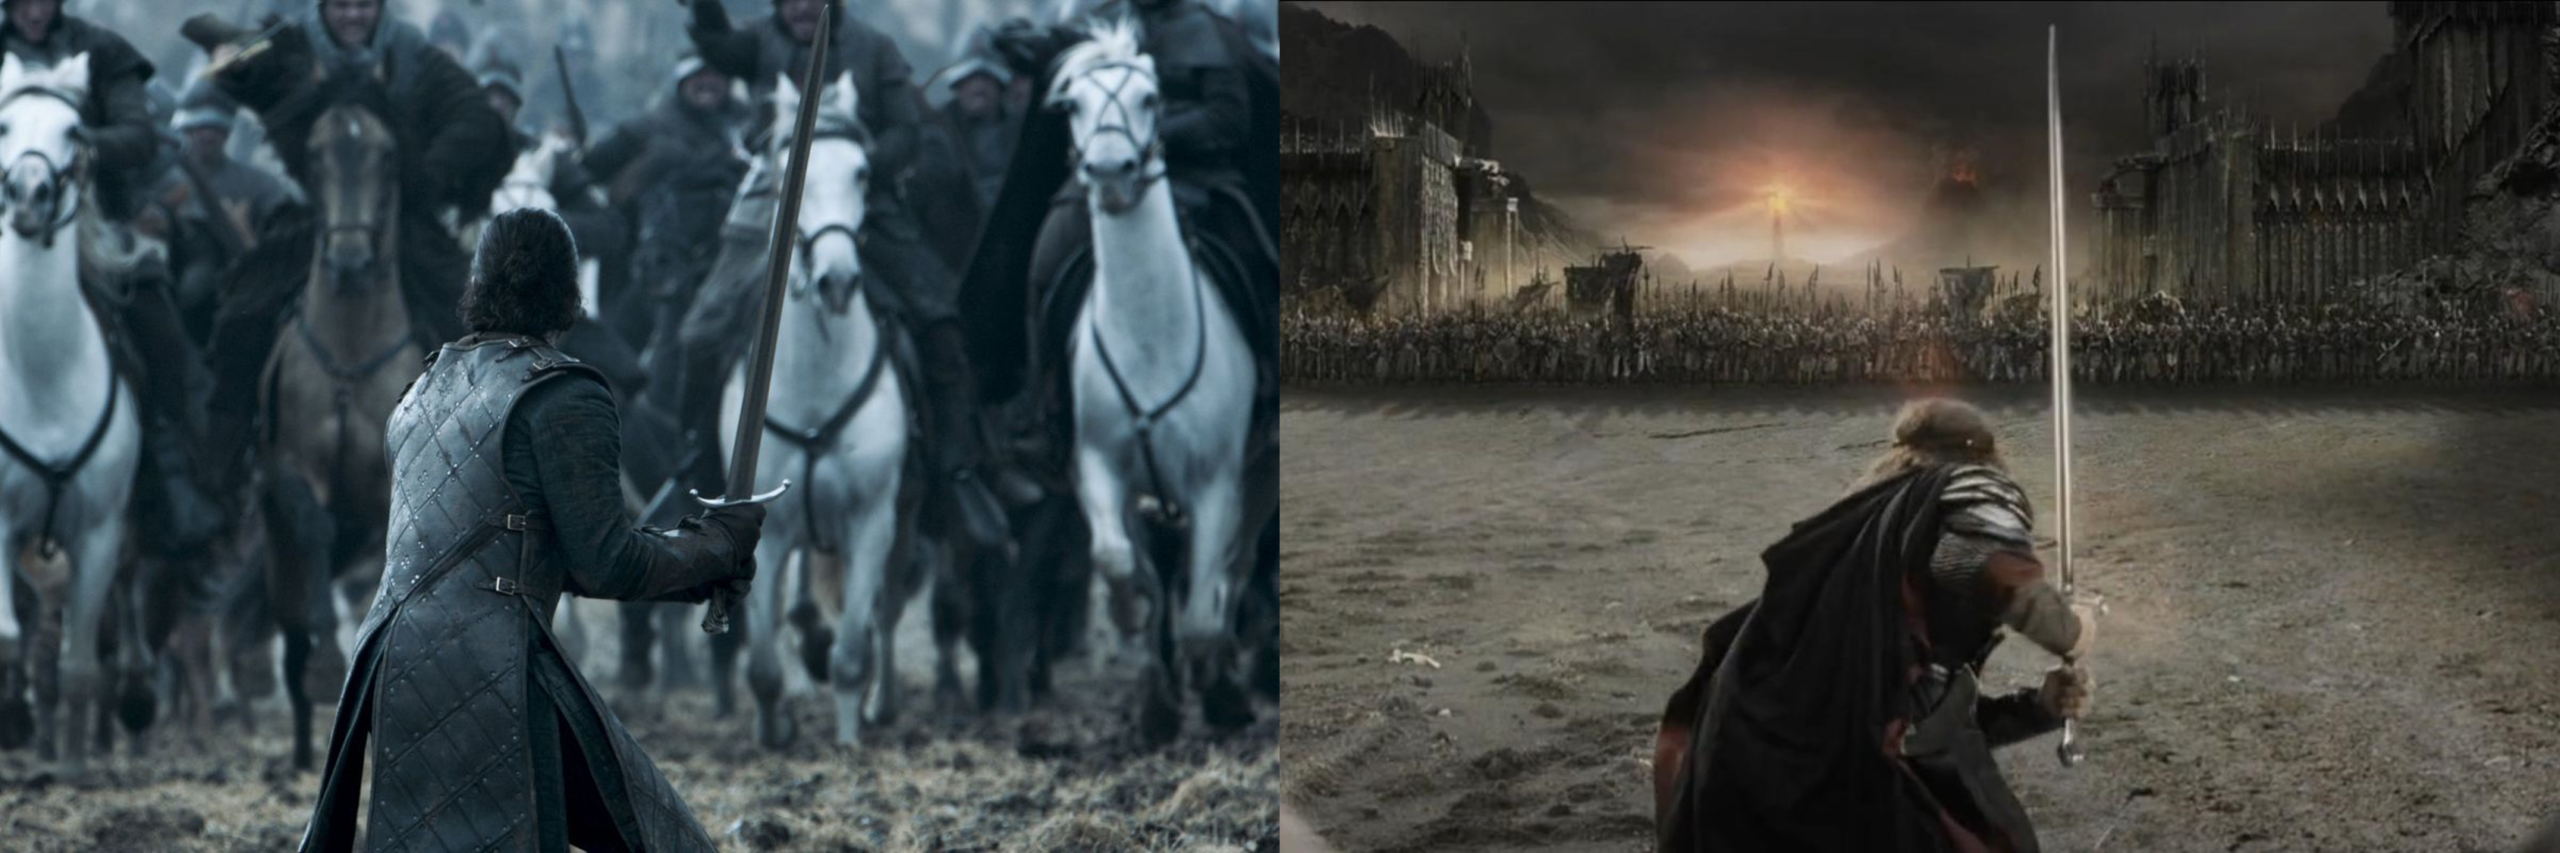 GRRM's Game of Thrones & Tokien's LotR side by side. 